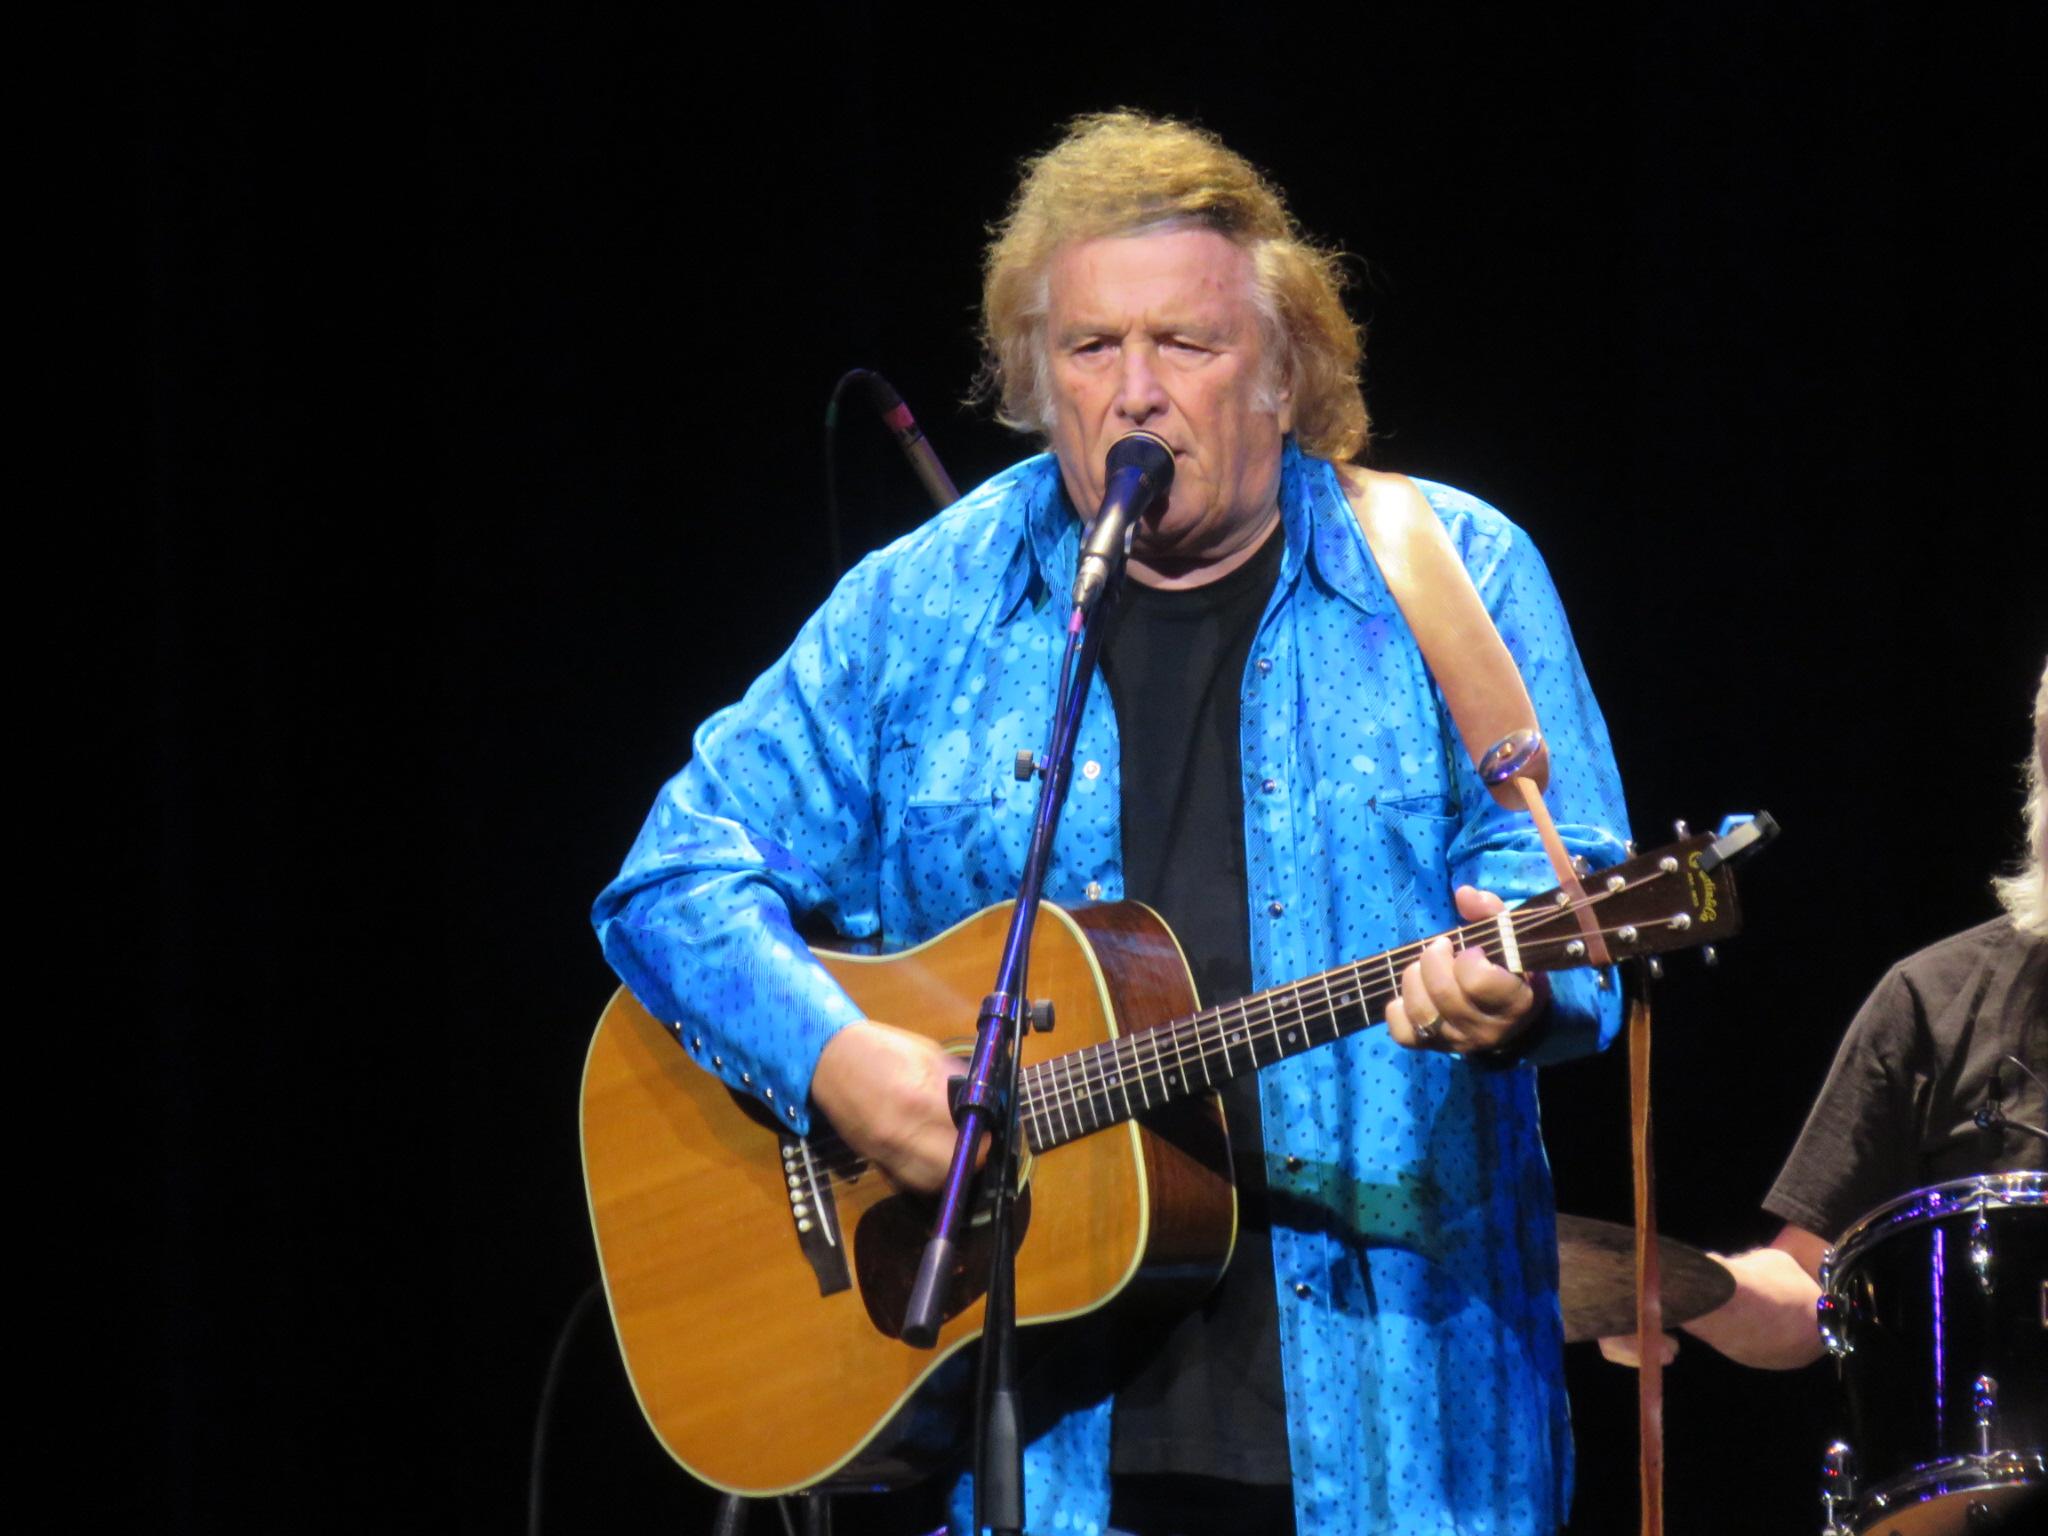 Don McLean of 'American Pie' fame shows he's more than a one